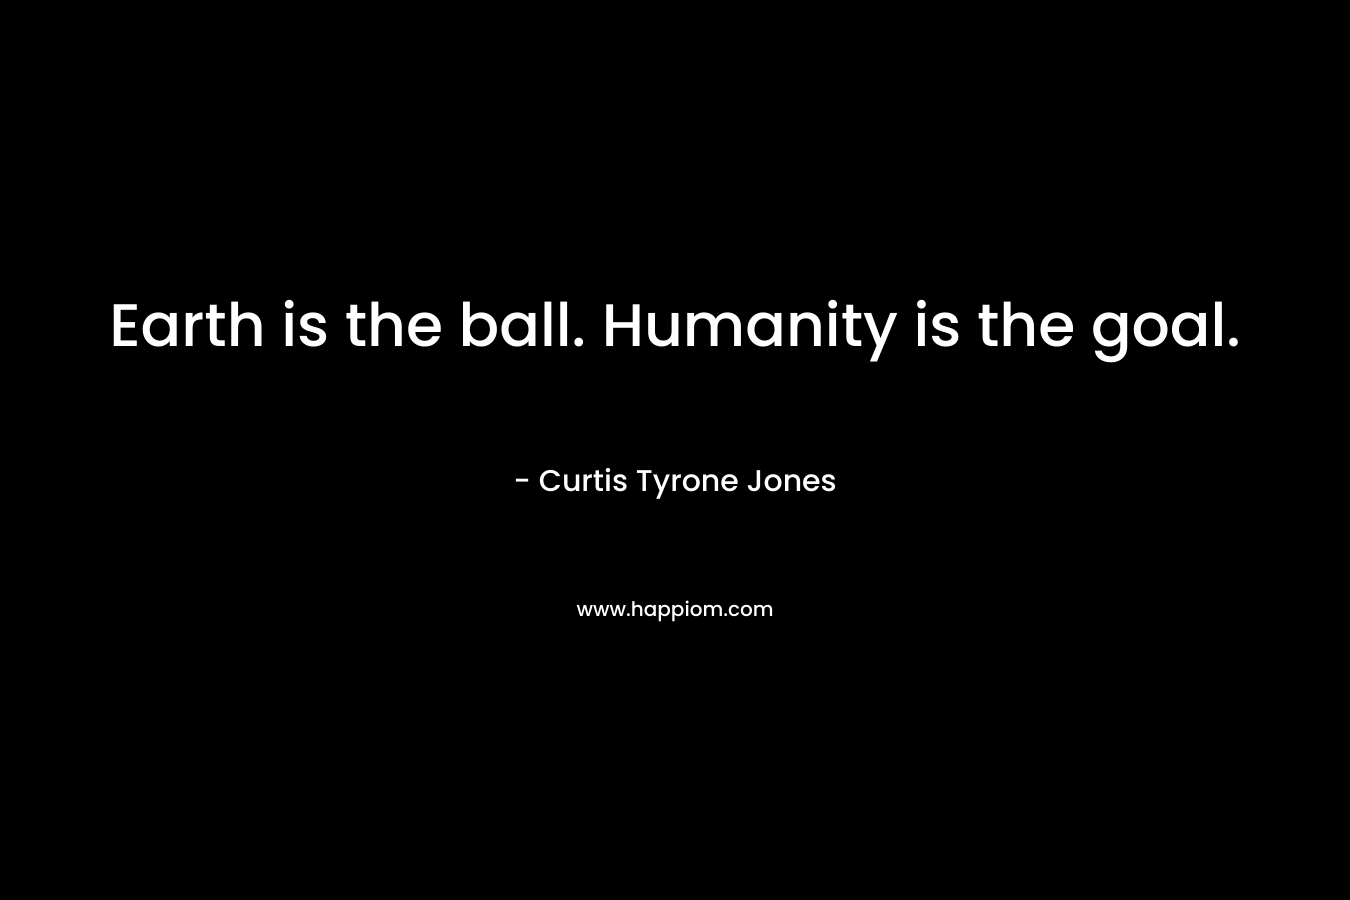 Earth is the ball. Humanity is the goal.